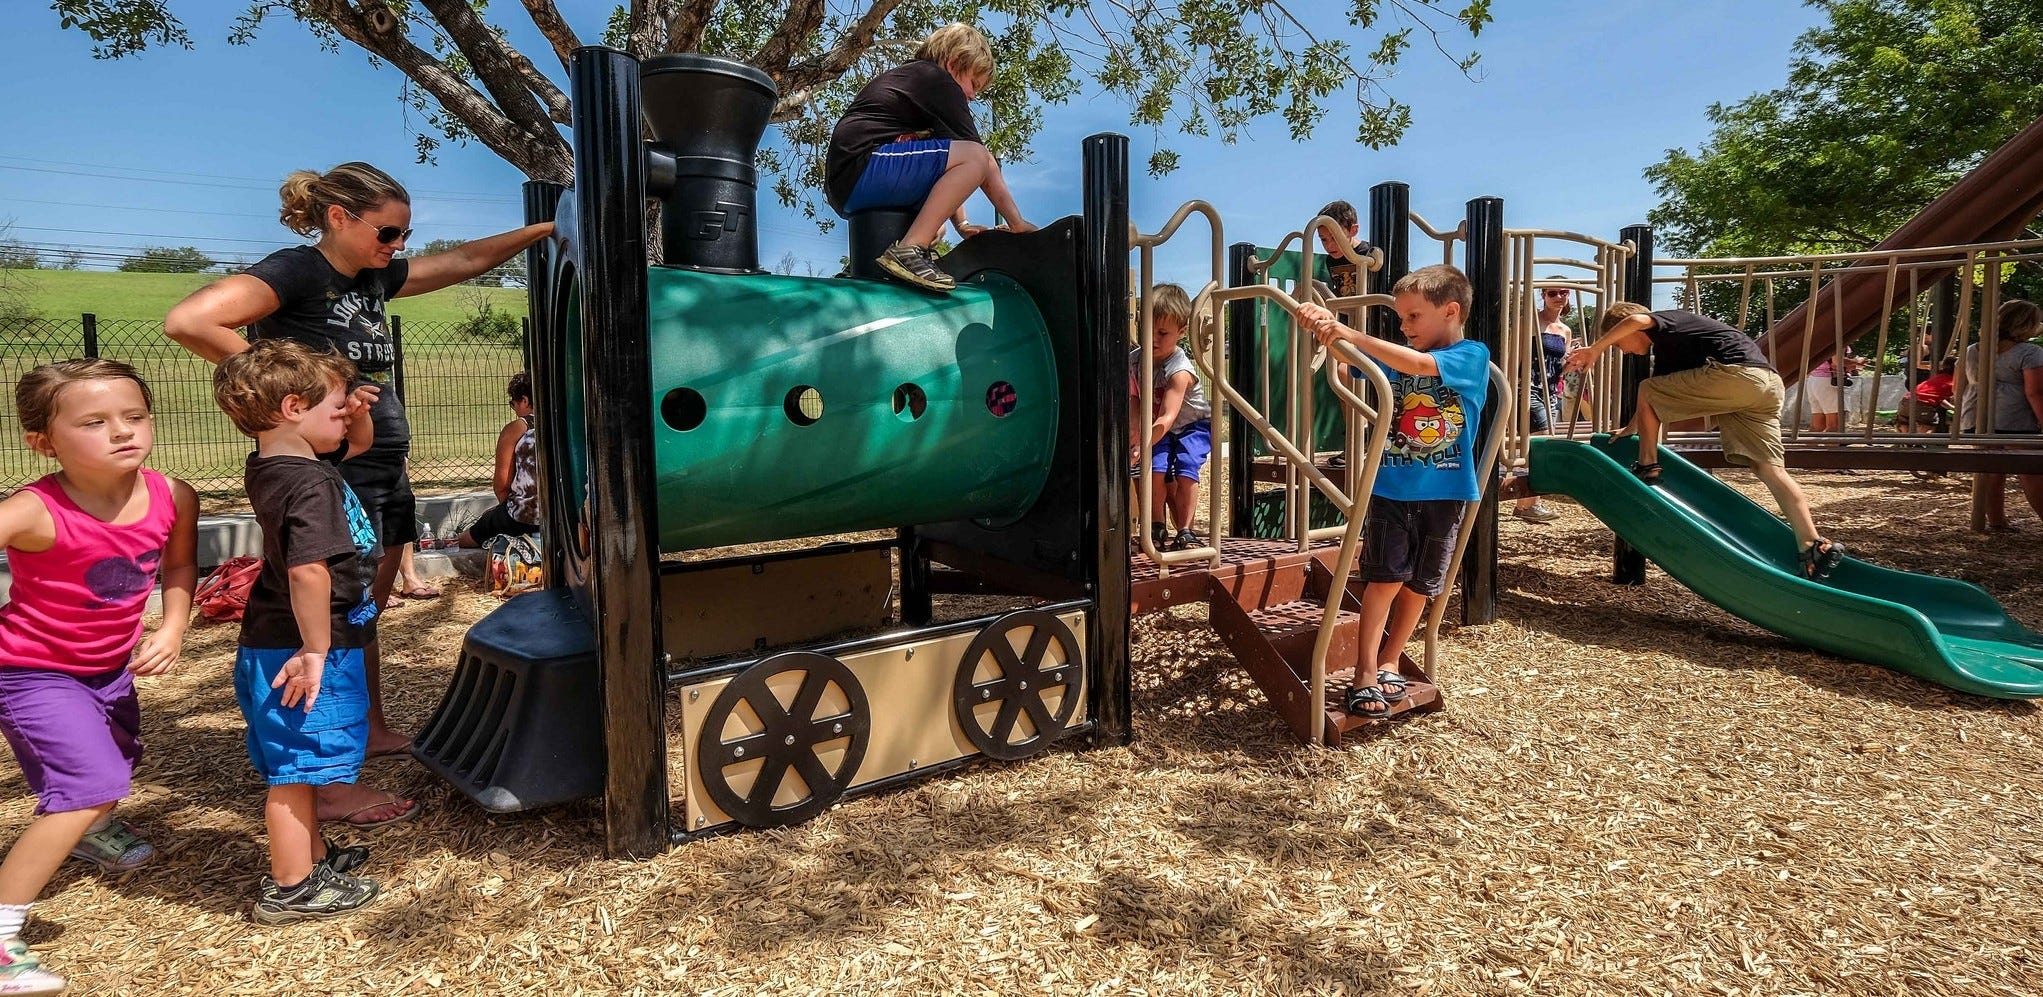 GameTime Celebrates the History of Georgetown, Texas with a New Creative Playscape